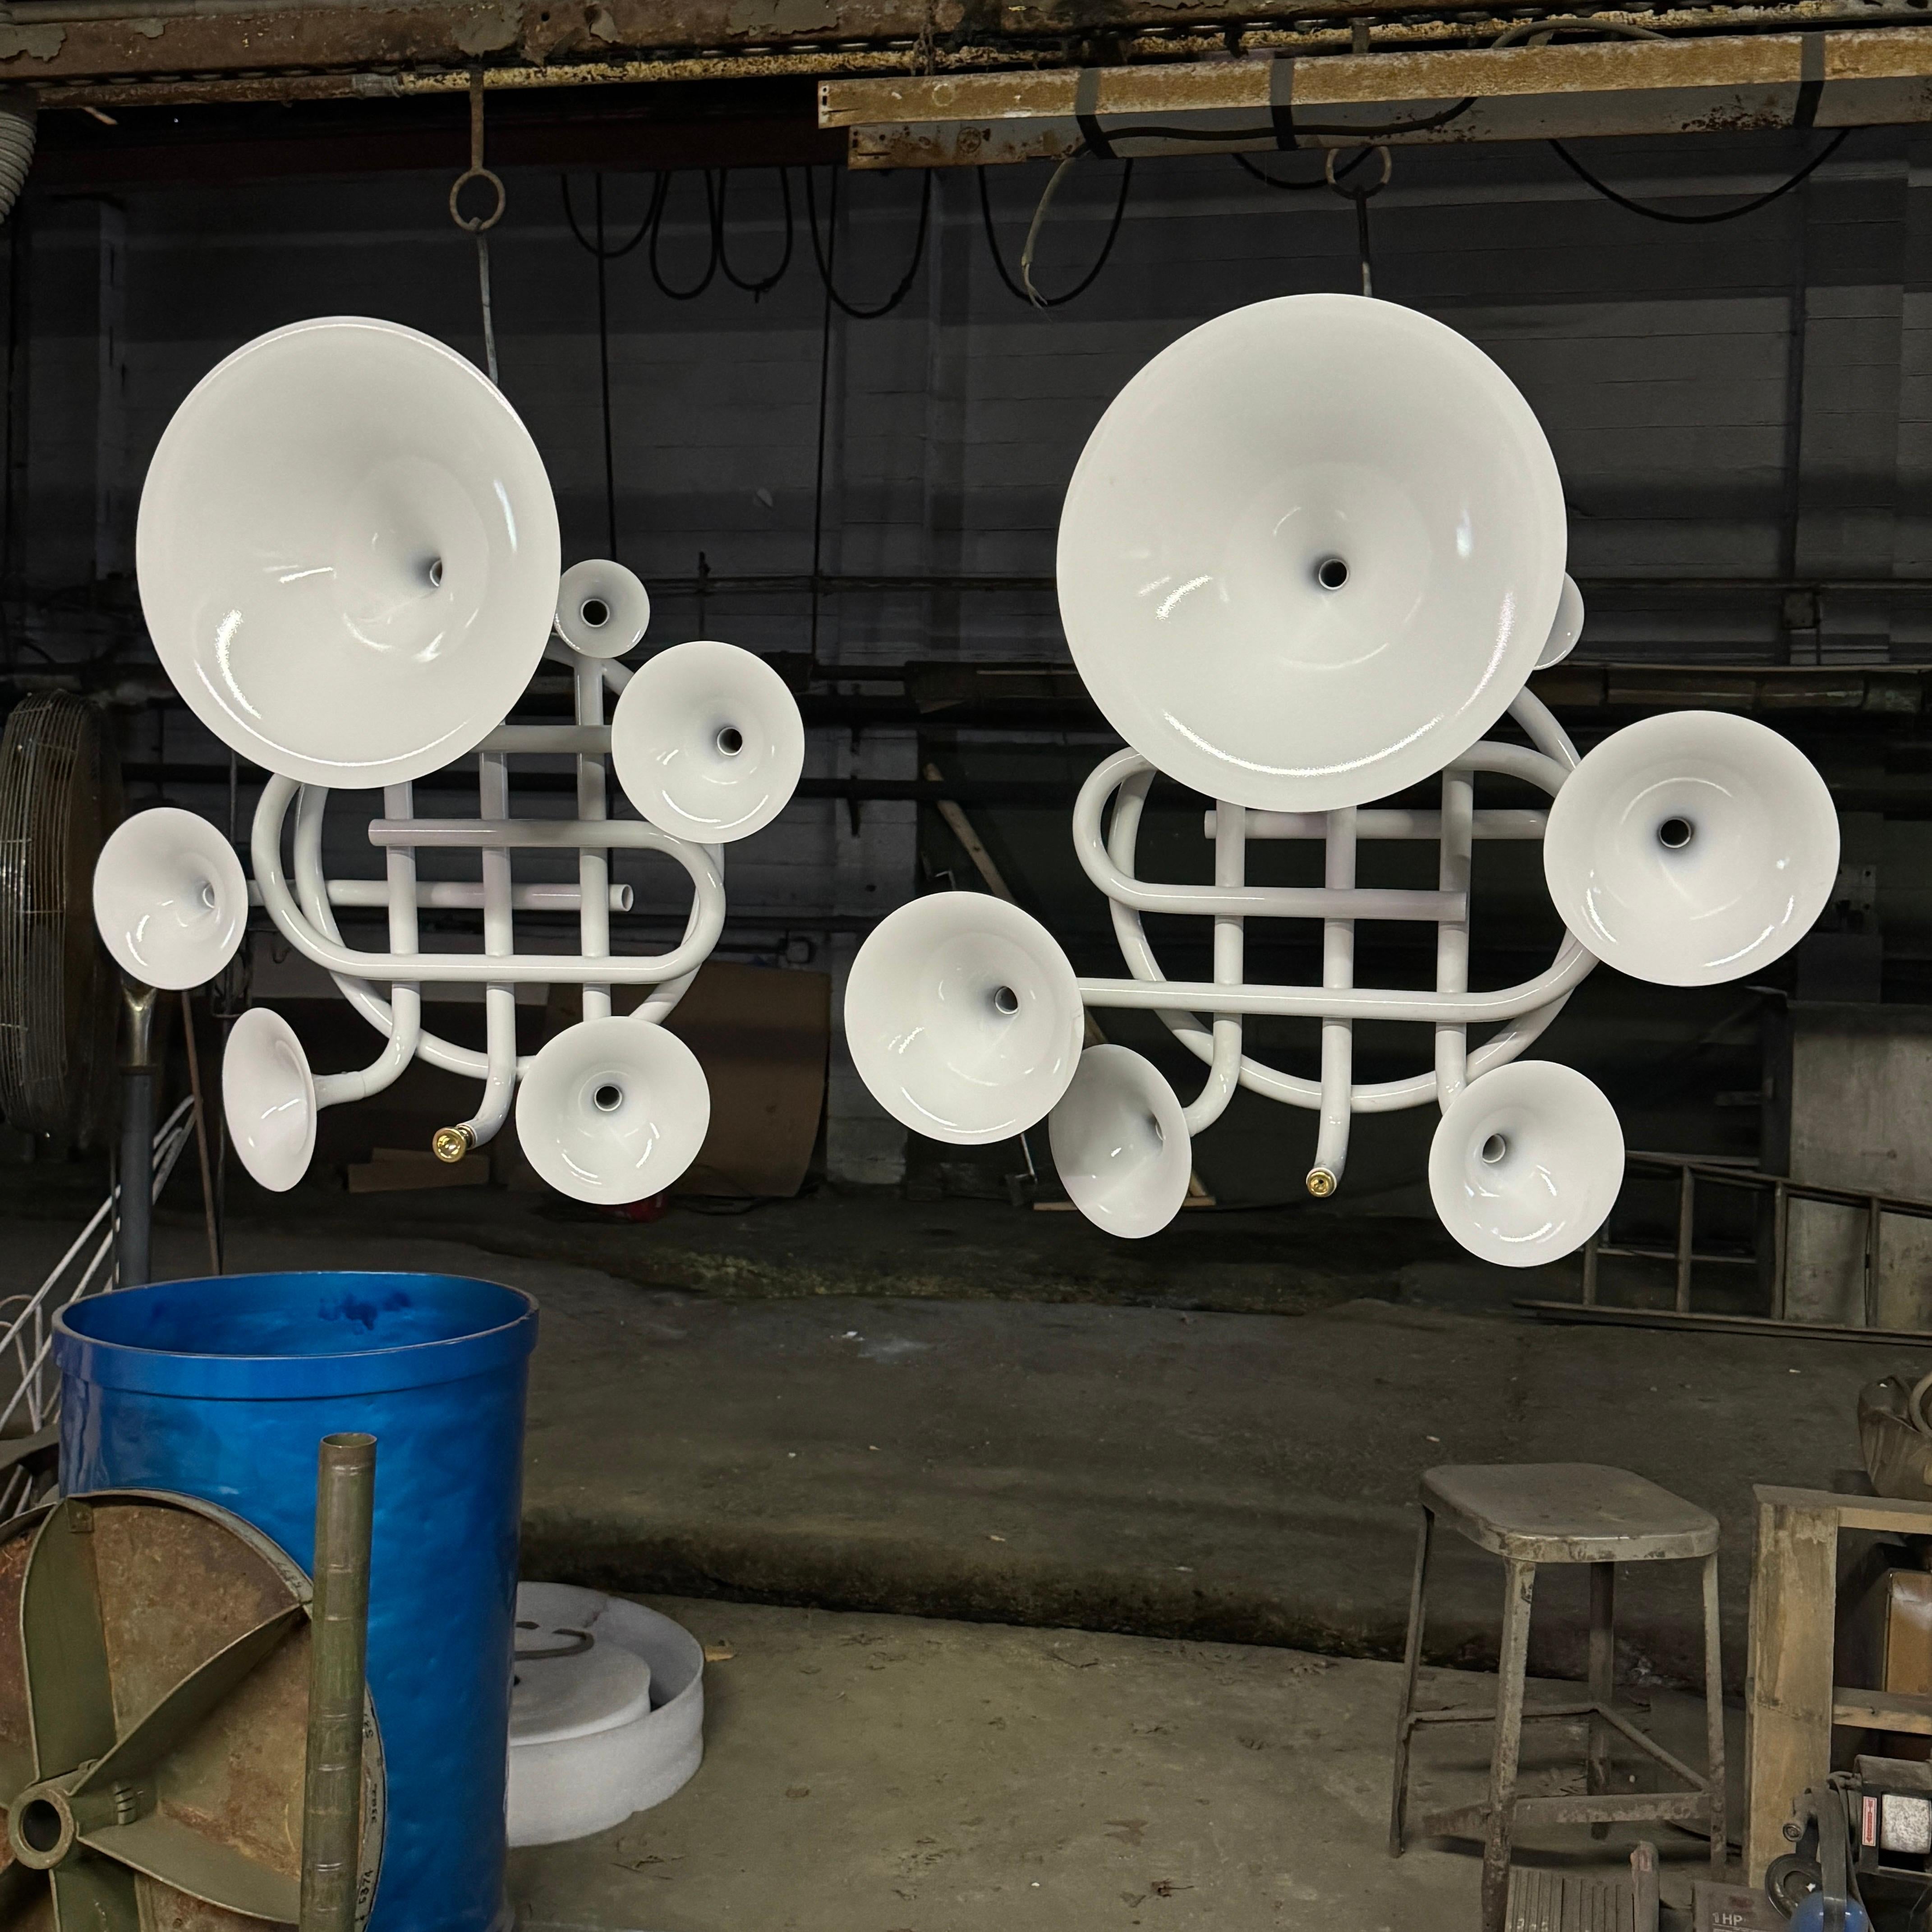 Decorate a music studio, den or office with these one-of-a-kind versatile powder-coated sculptural wall instruments consisting of tubas, trumpets and bassoons. This set would be a wonderful focal point in a home as well as a bar or restaurant